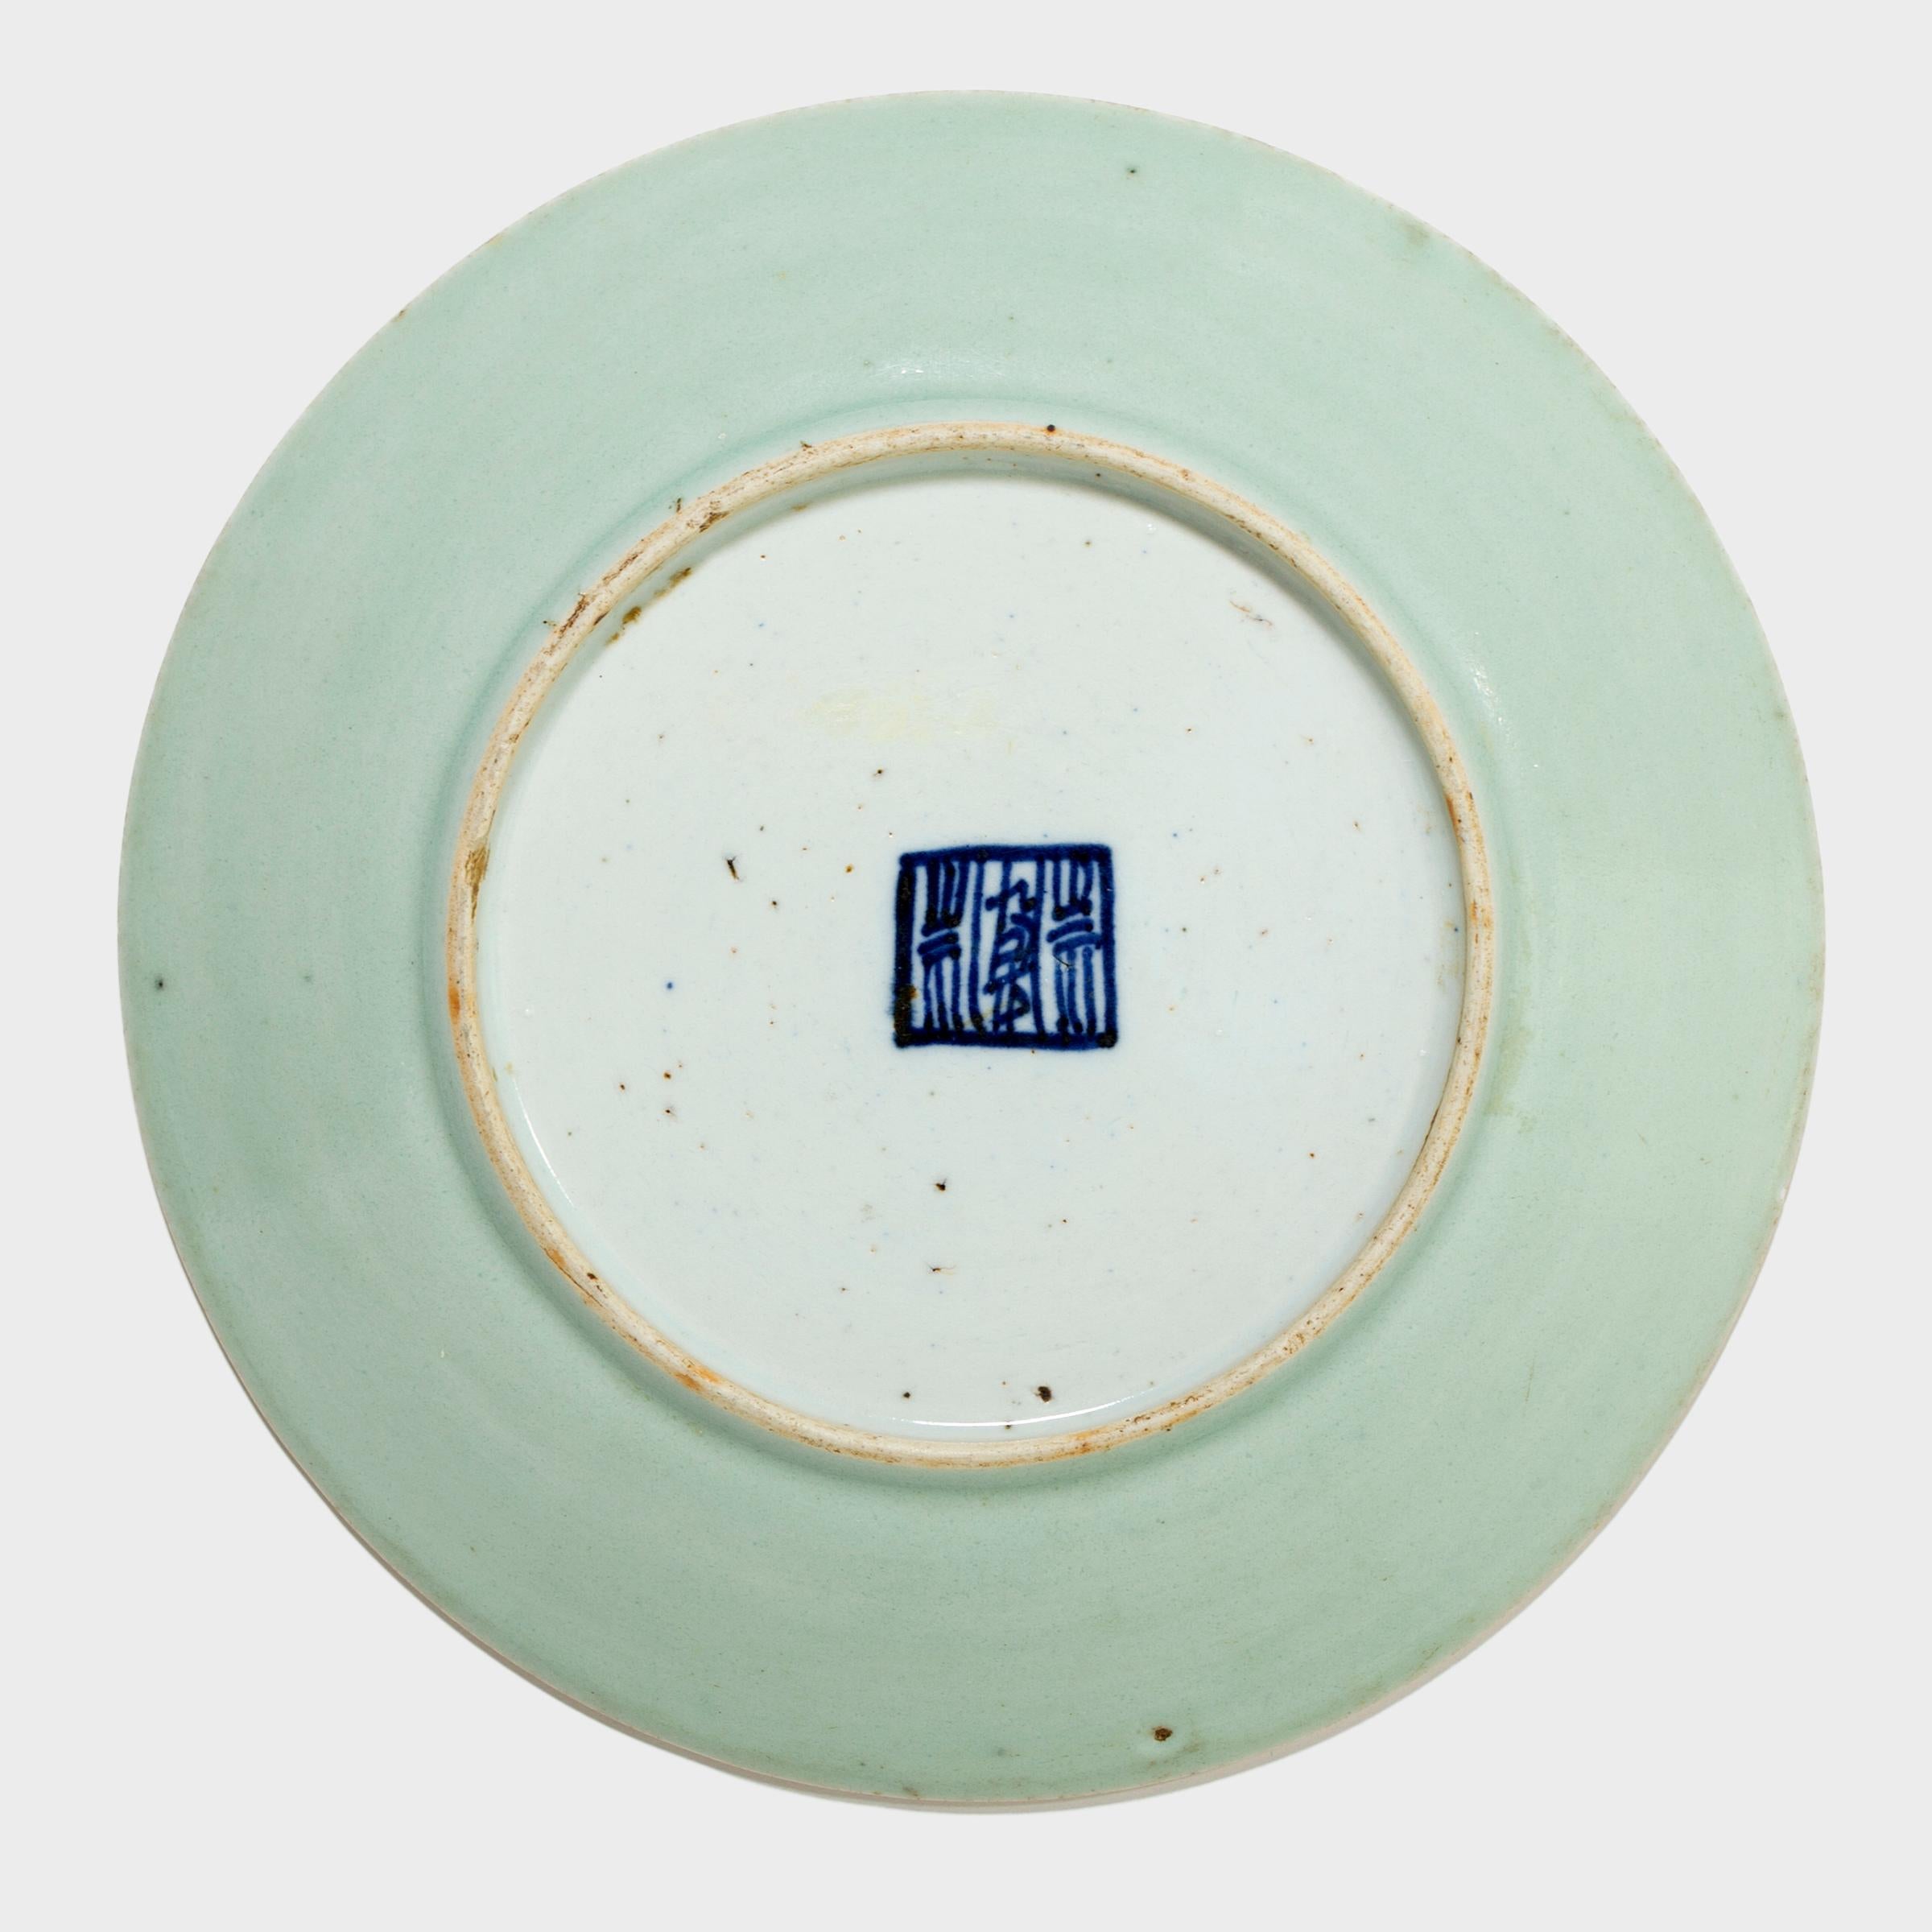 Described by ancient Chinese as a “full moon dyed with spring water,” celadon ware is prized for its lustrous green glaze. Perfected over the centuries, the glaze ranges in color from blue-green to olive green, owing to the amount of iron oxide